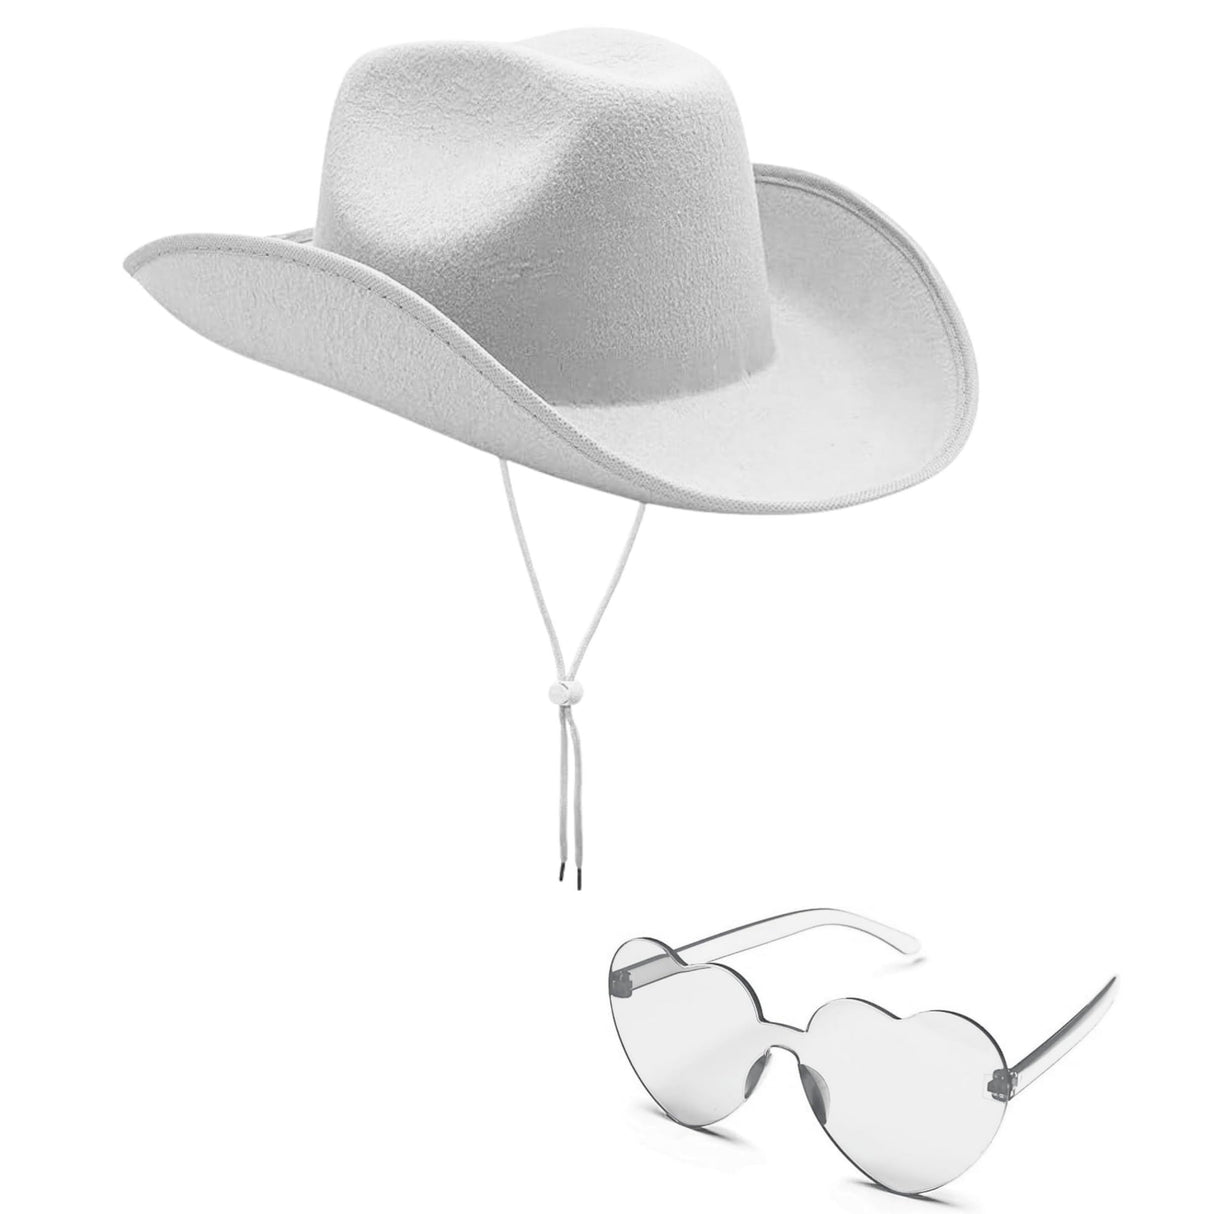 4E's Novelty White Cowboy Hat with Heart Shaped Glasses for Adults Women Men, Felt Cowgirl Hat Western Party Dress Up Accessories